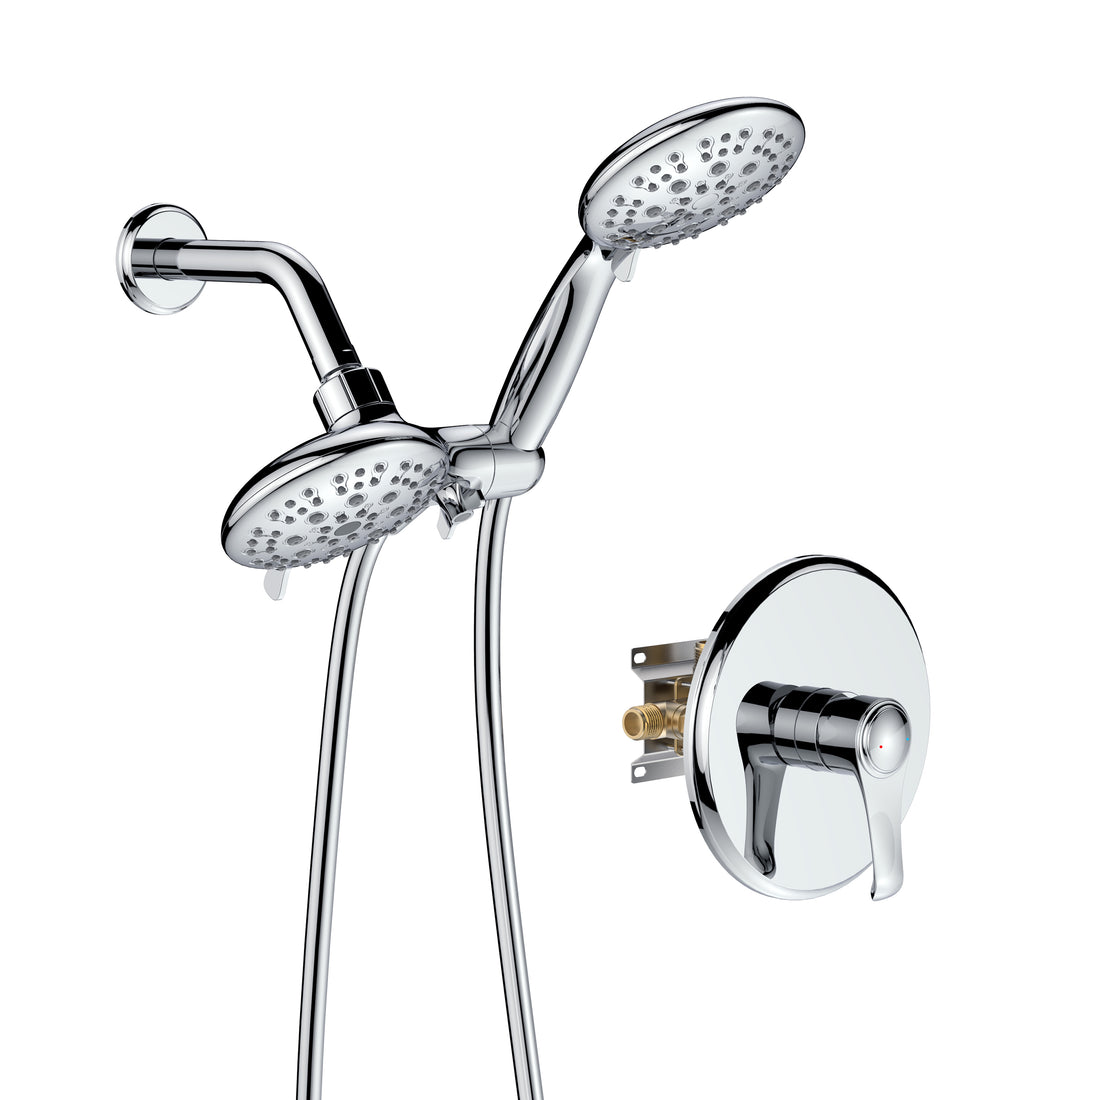 Large Amount of water Multi Function Dual Shower Head chrome-brass